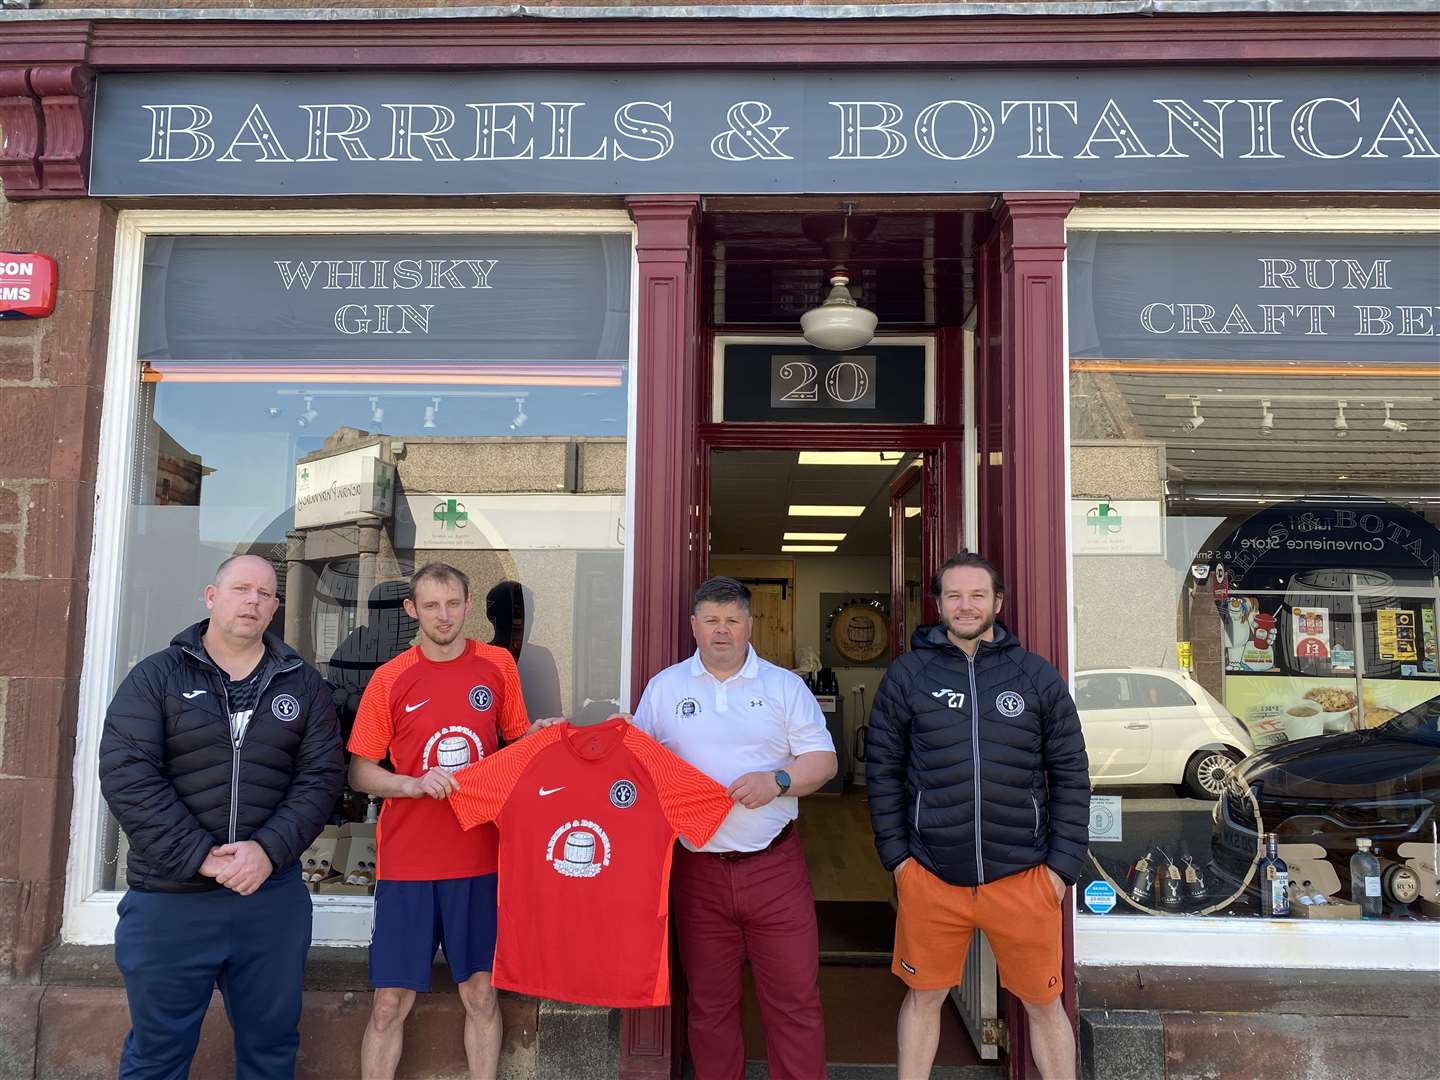 The Barrels and Botanicals shop in Turriff has sponsored the new strips for Cuminestown United.